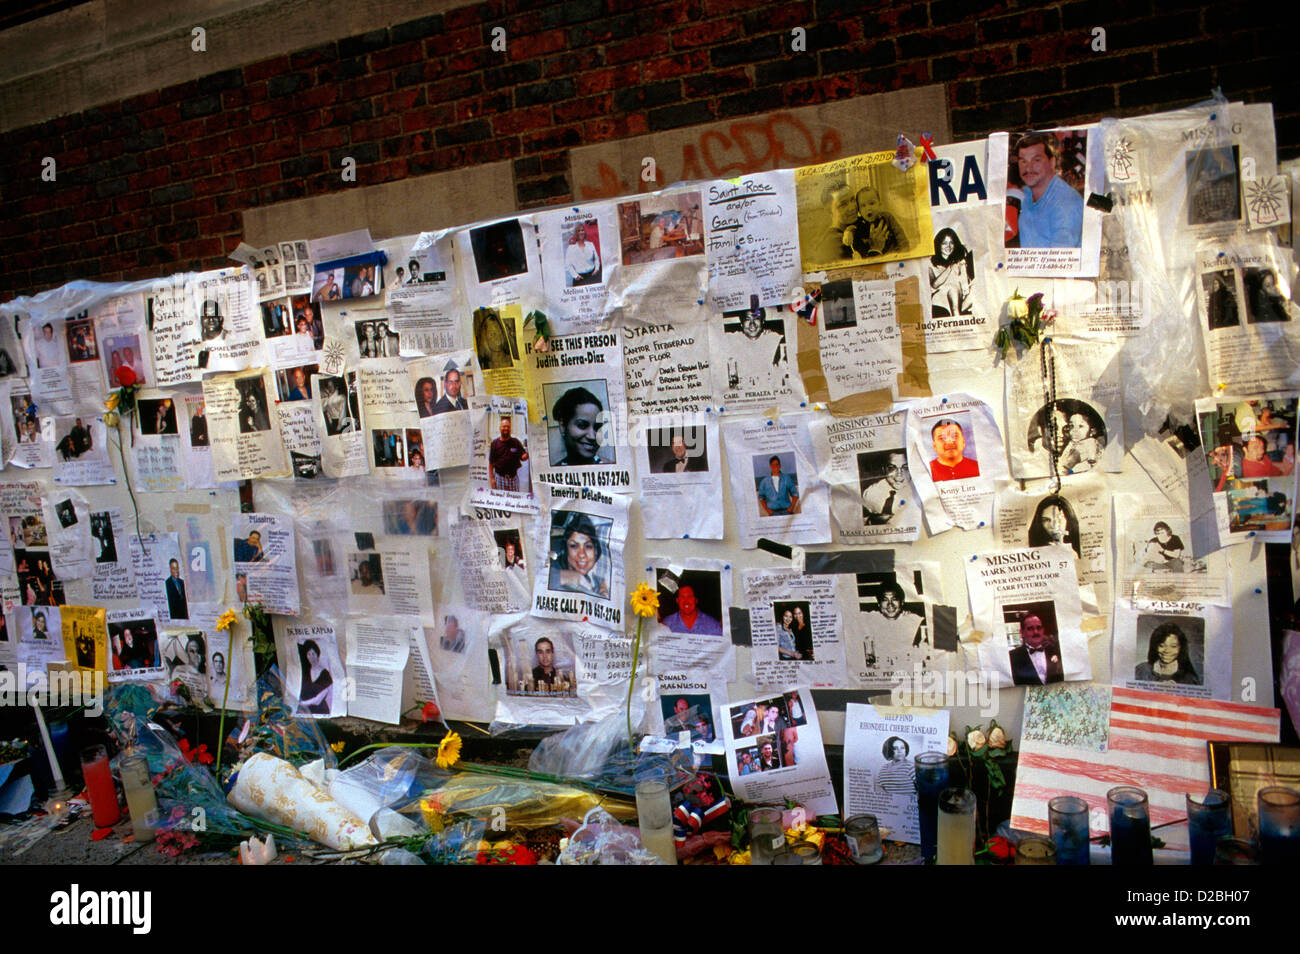 New York City, 9/11/2001. Wall Of Photos Of Missing Persons Following World Trade Center Attack Stock Photo